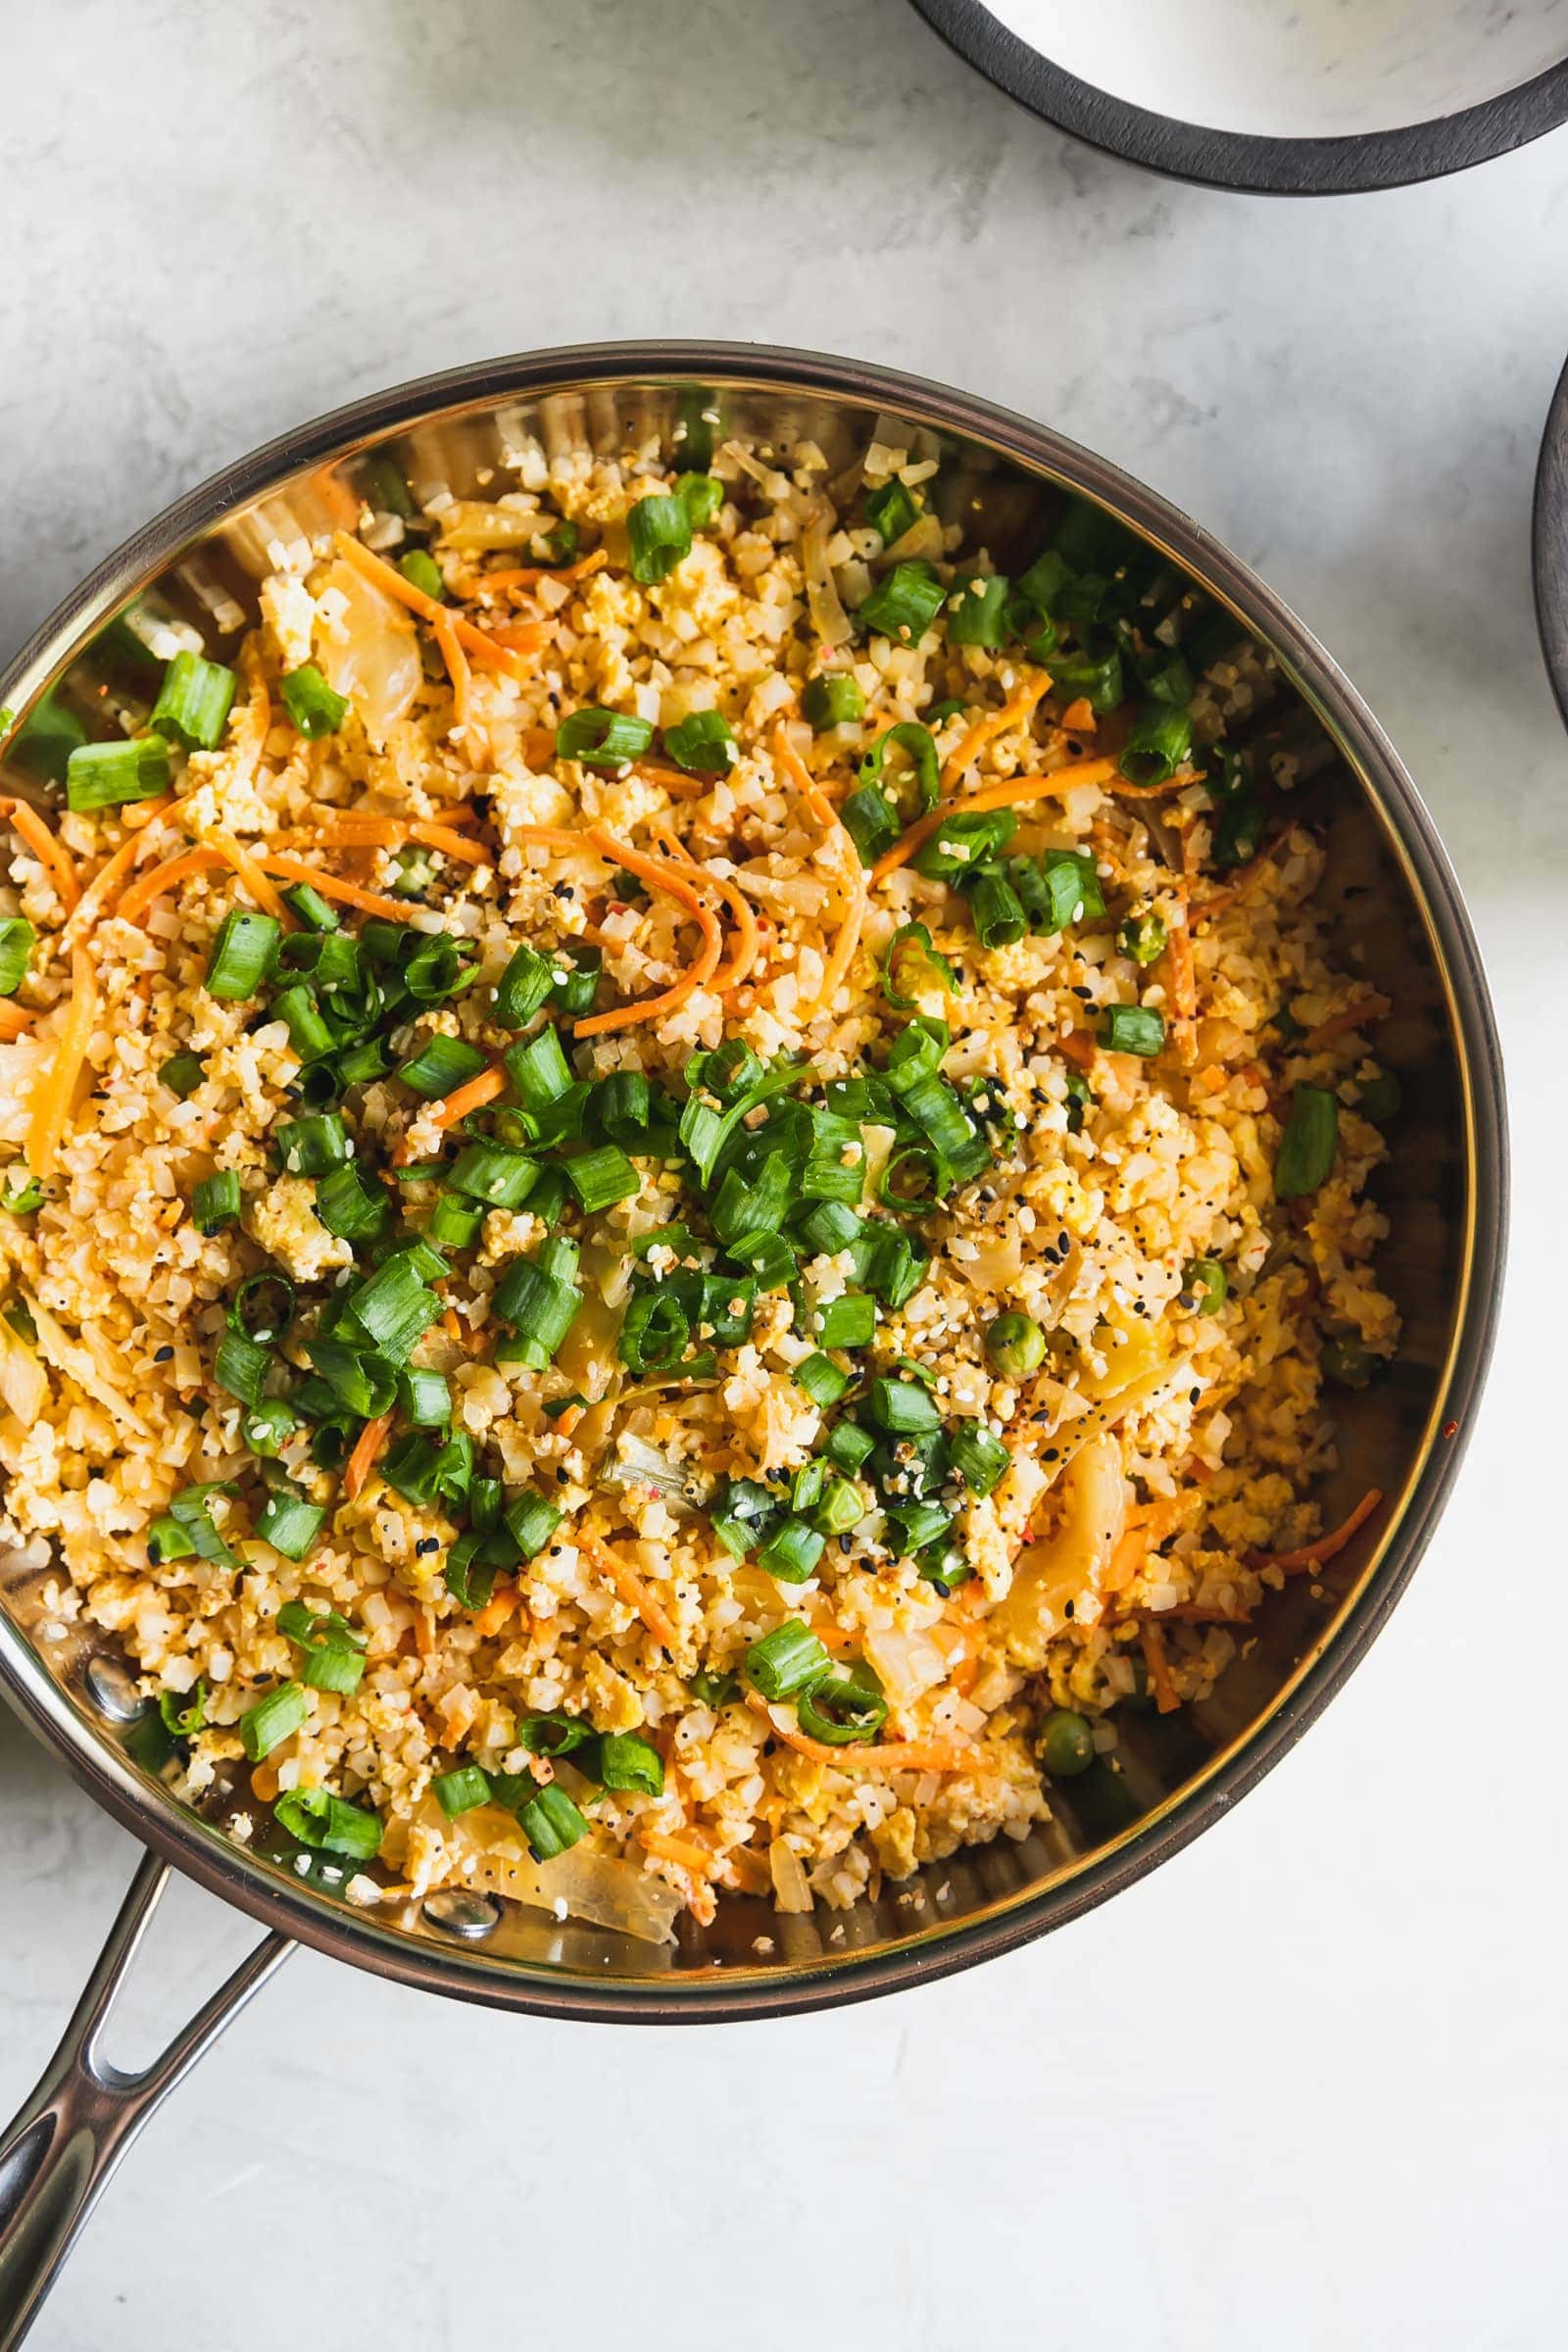 Love fried rice? Here's a healthier alternative made with riced cauliflower, peas, carrots, kimchi, garlic, soy sauce, and chili paste. Ready in just 15-minutes!